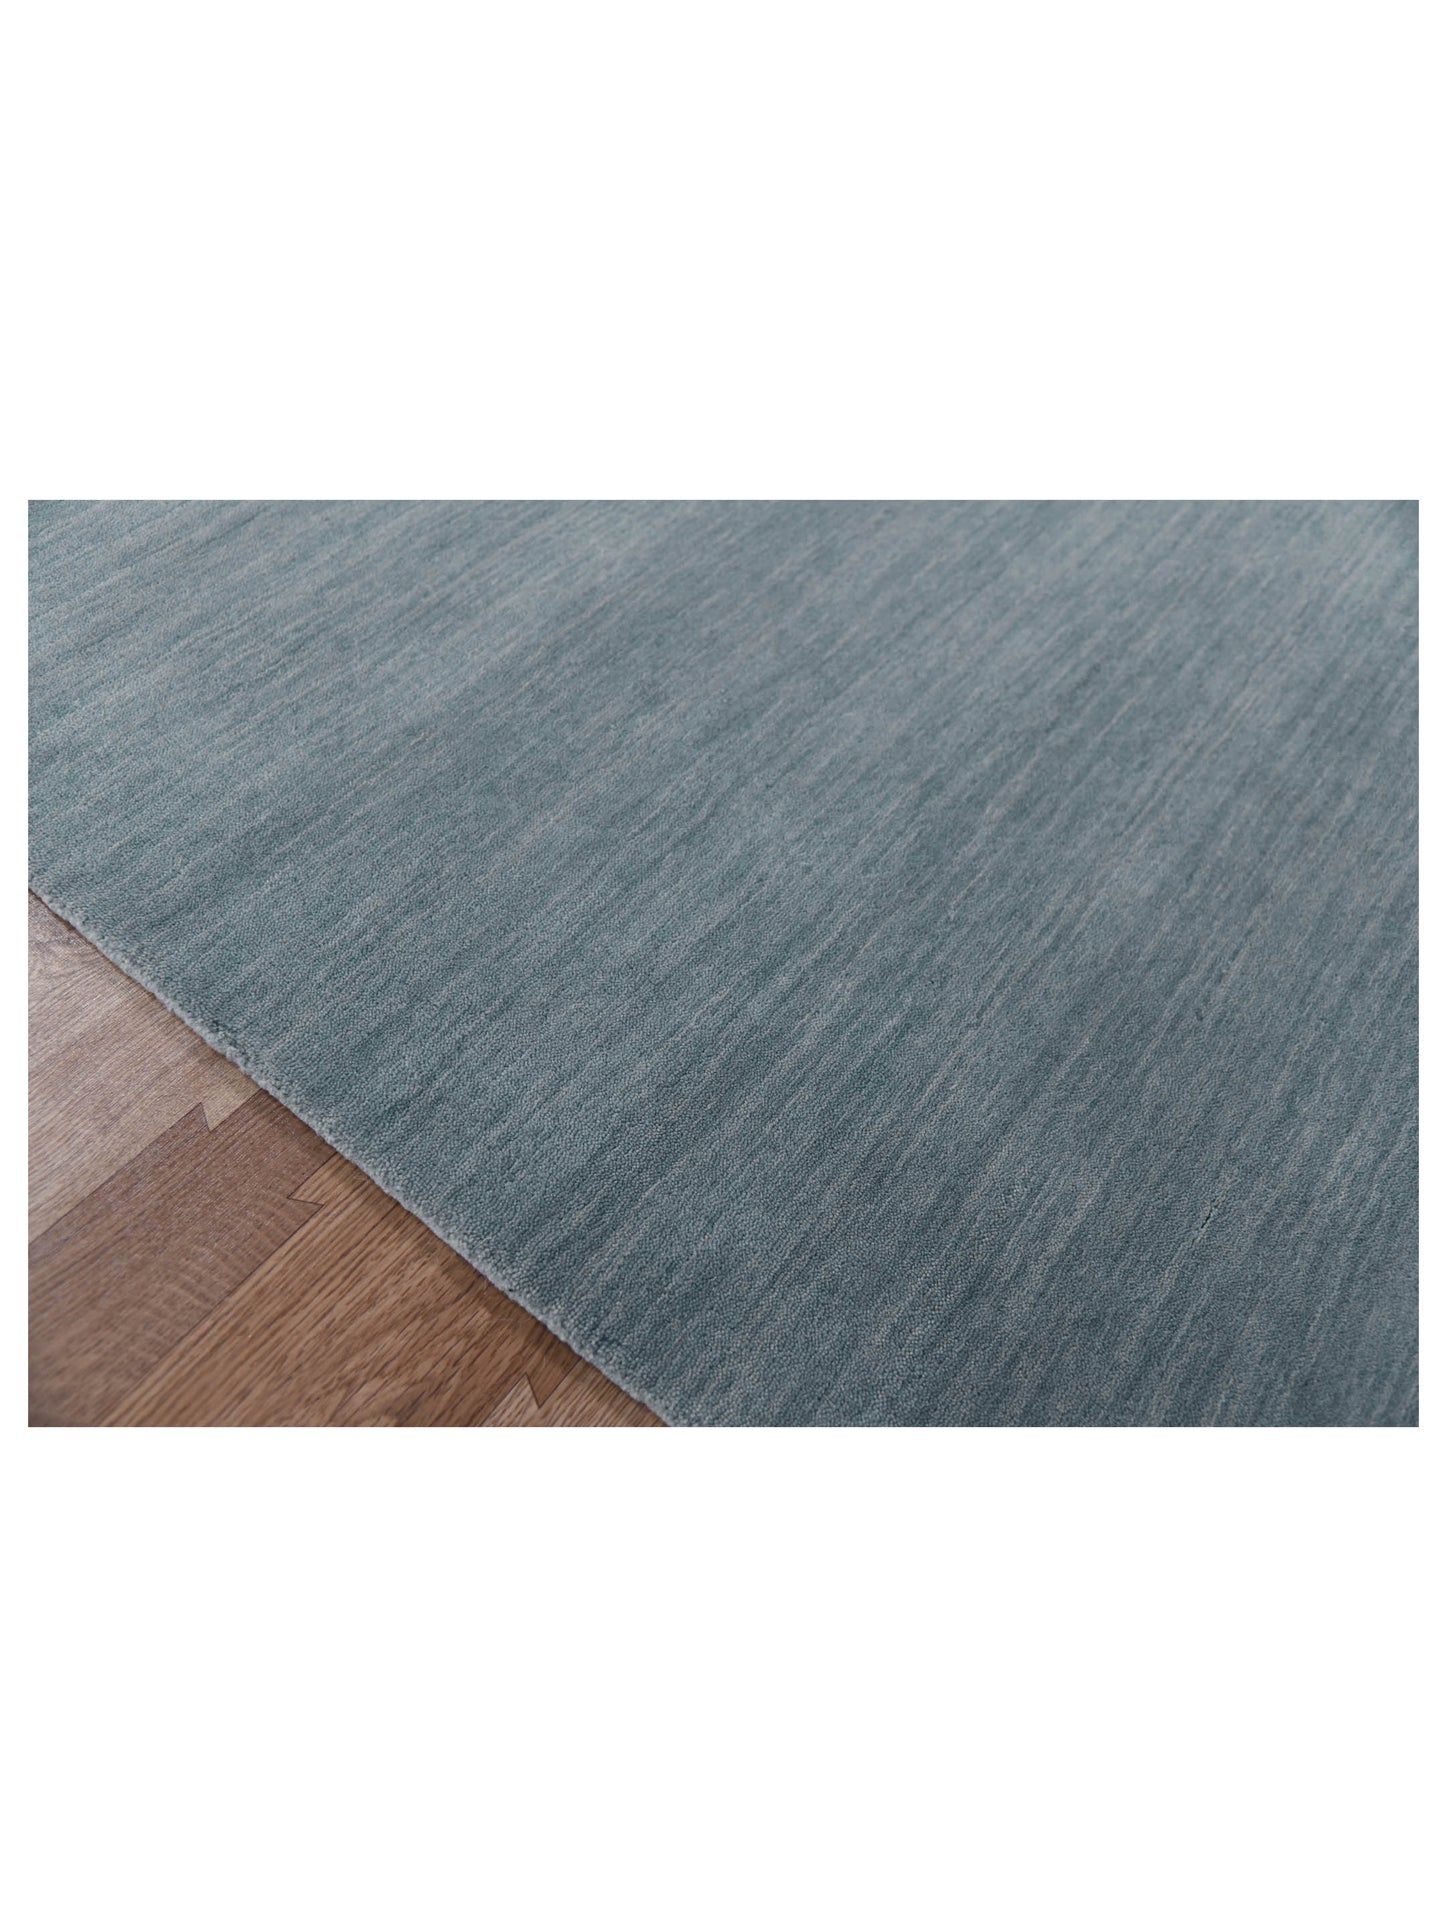 Limited ARMIDALE ARM-304 POLO BLUE  Transitional Woven Rug